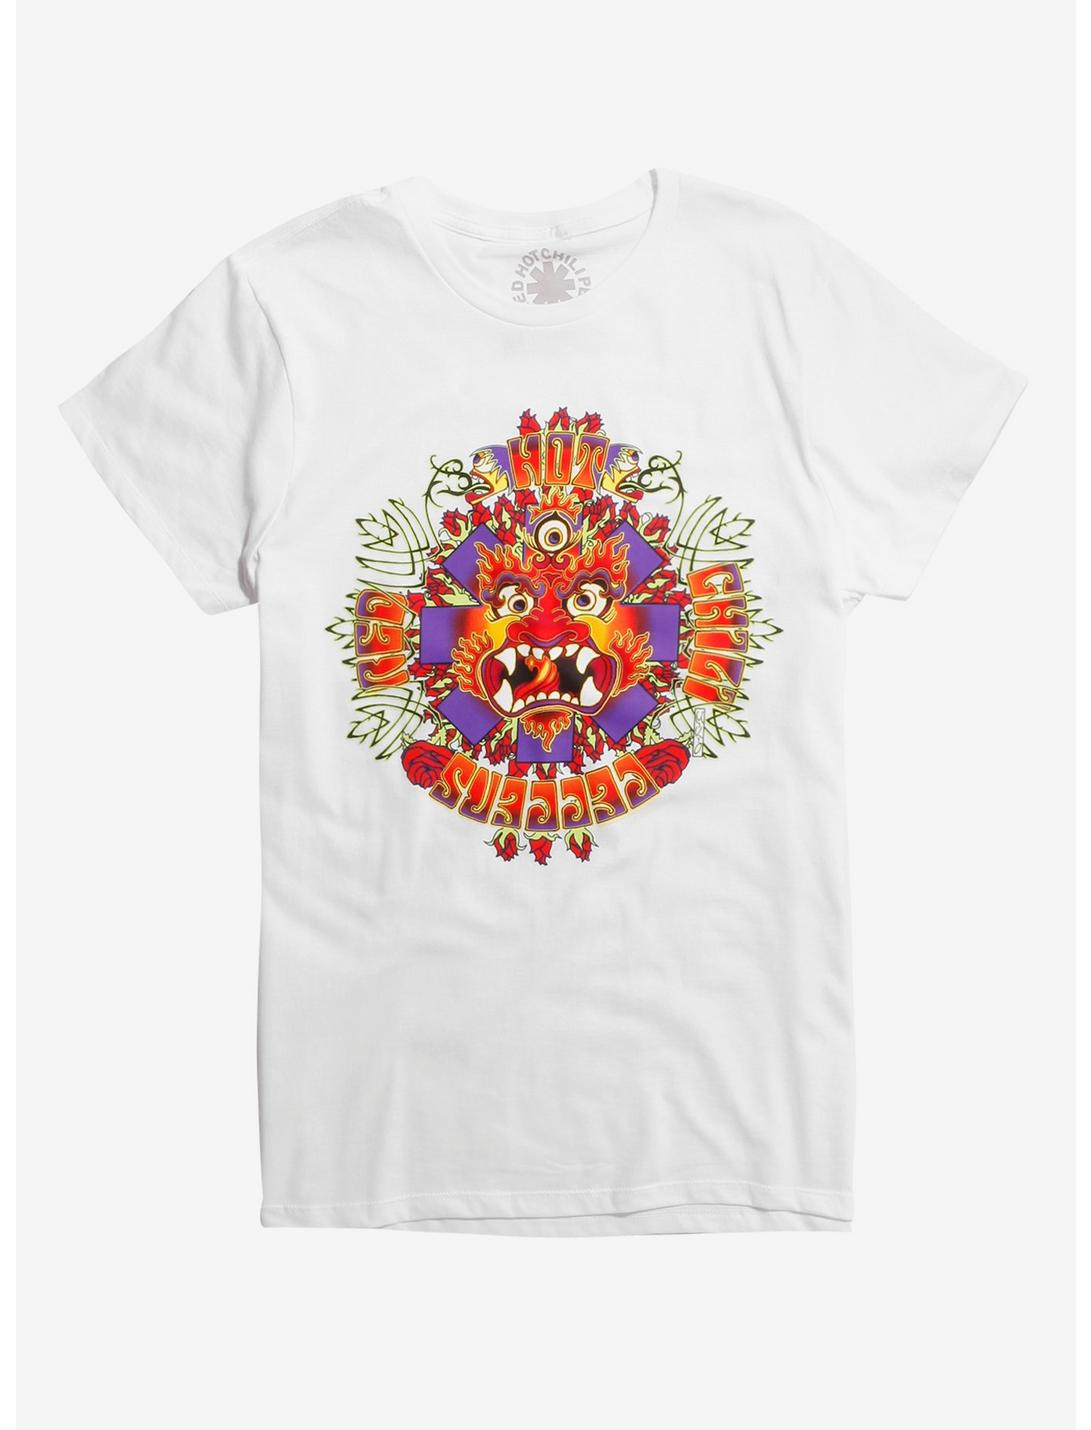 Red Hot Chili Peppers Dragon T-Shirt, WHITE, hi-res